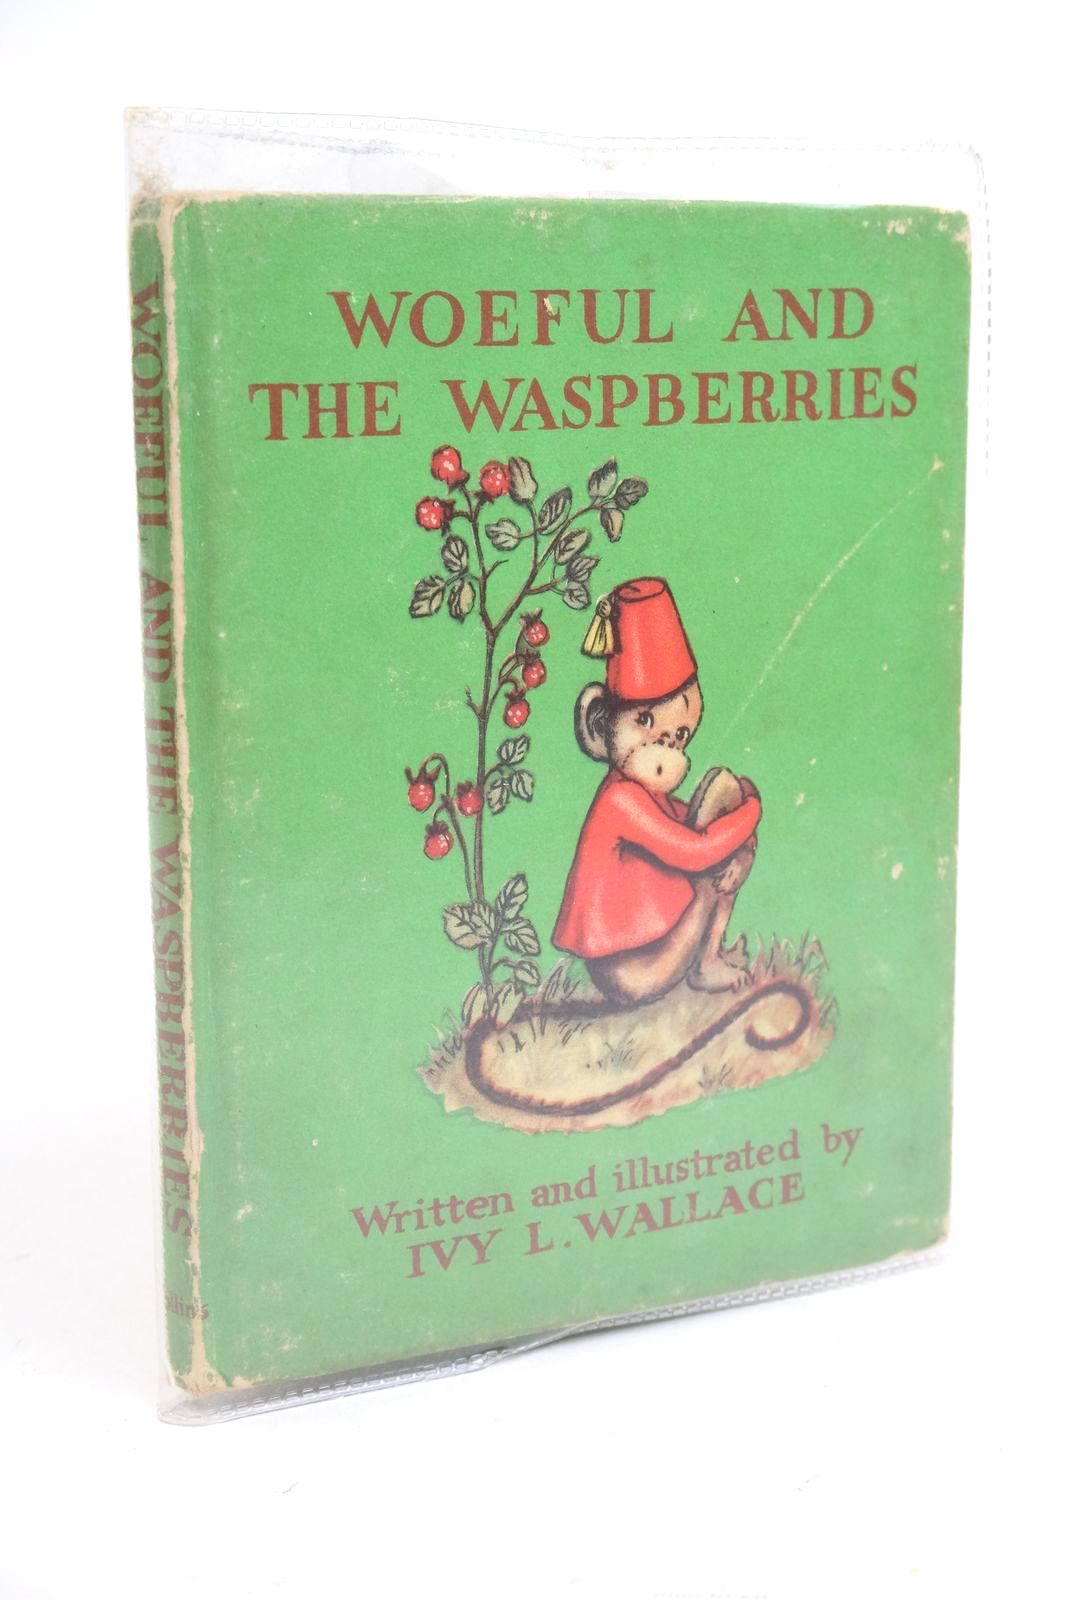 Photo of WOEFUL AND THE WASPBERRIES written by Wallace, Ivy L. illustrated by Wallace, Ivy L. published by Collins (STOCK CODE: 1322391)  for sale by Stella & Rose's Books